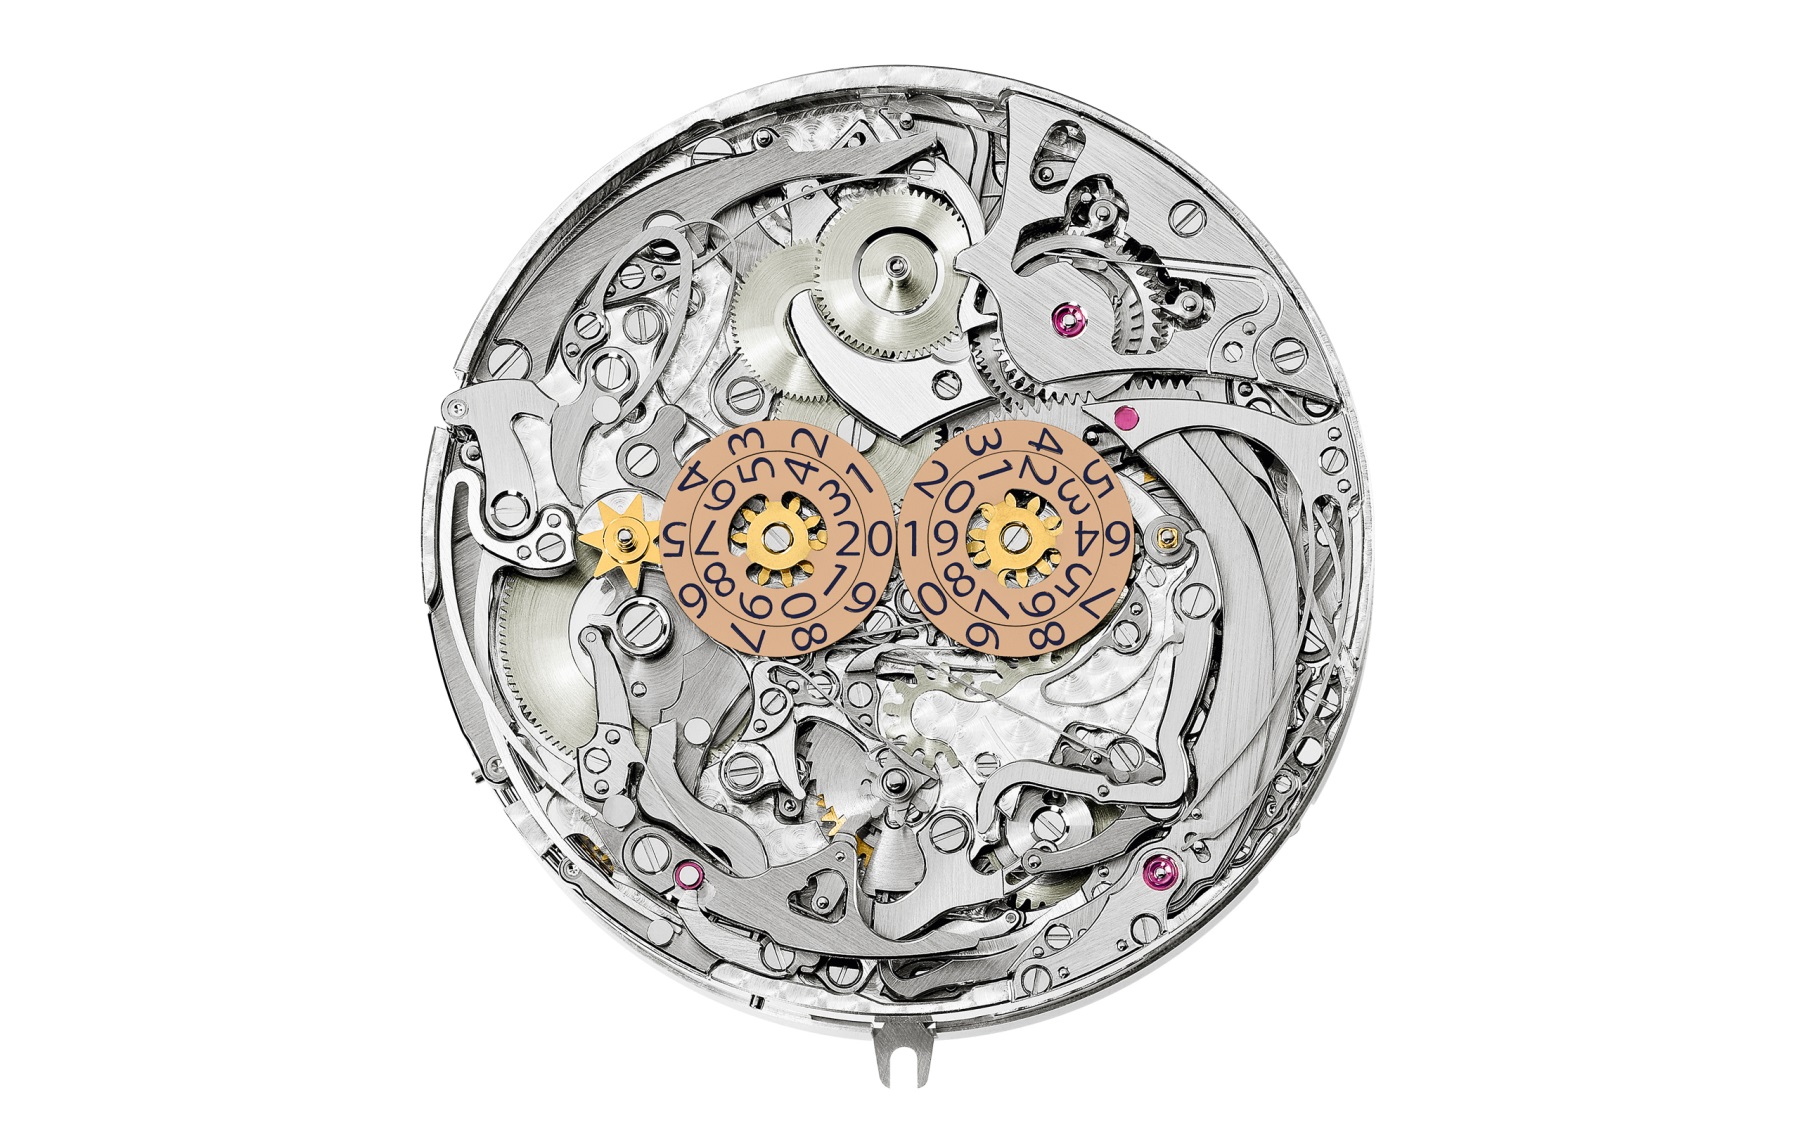 This Grandmaster Chime is the most complex wristwatch Patek Philippe has ever produced